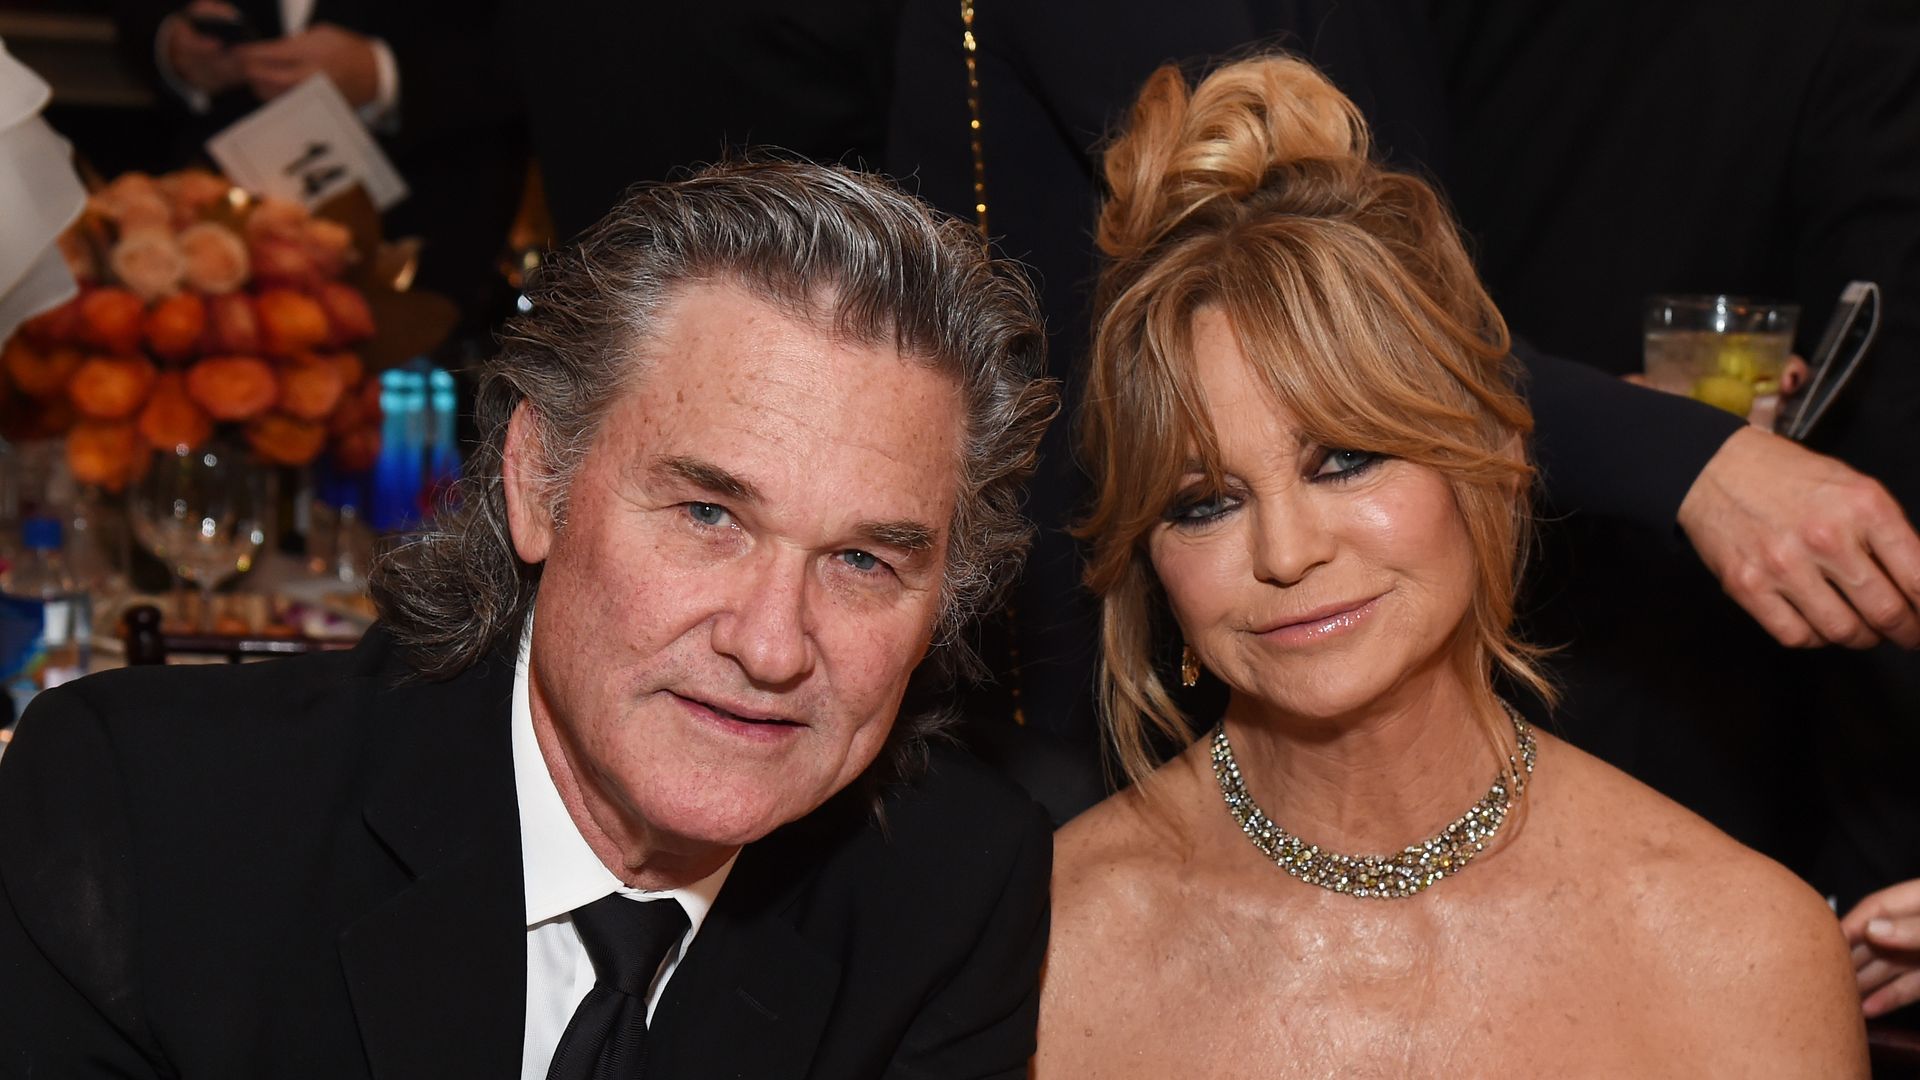 Actors Kurt Russell (L) and Goldie Hawn attend the 74th Annual Golden Globe Awards at The Beverly Hilton Hotel on January 8, 2017 in Beverly Hills, California.